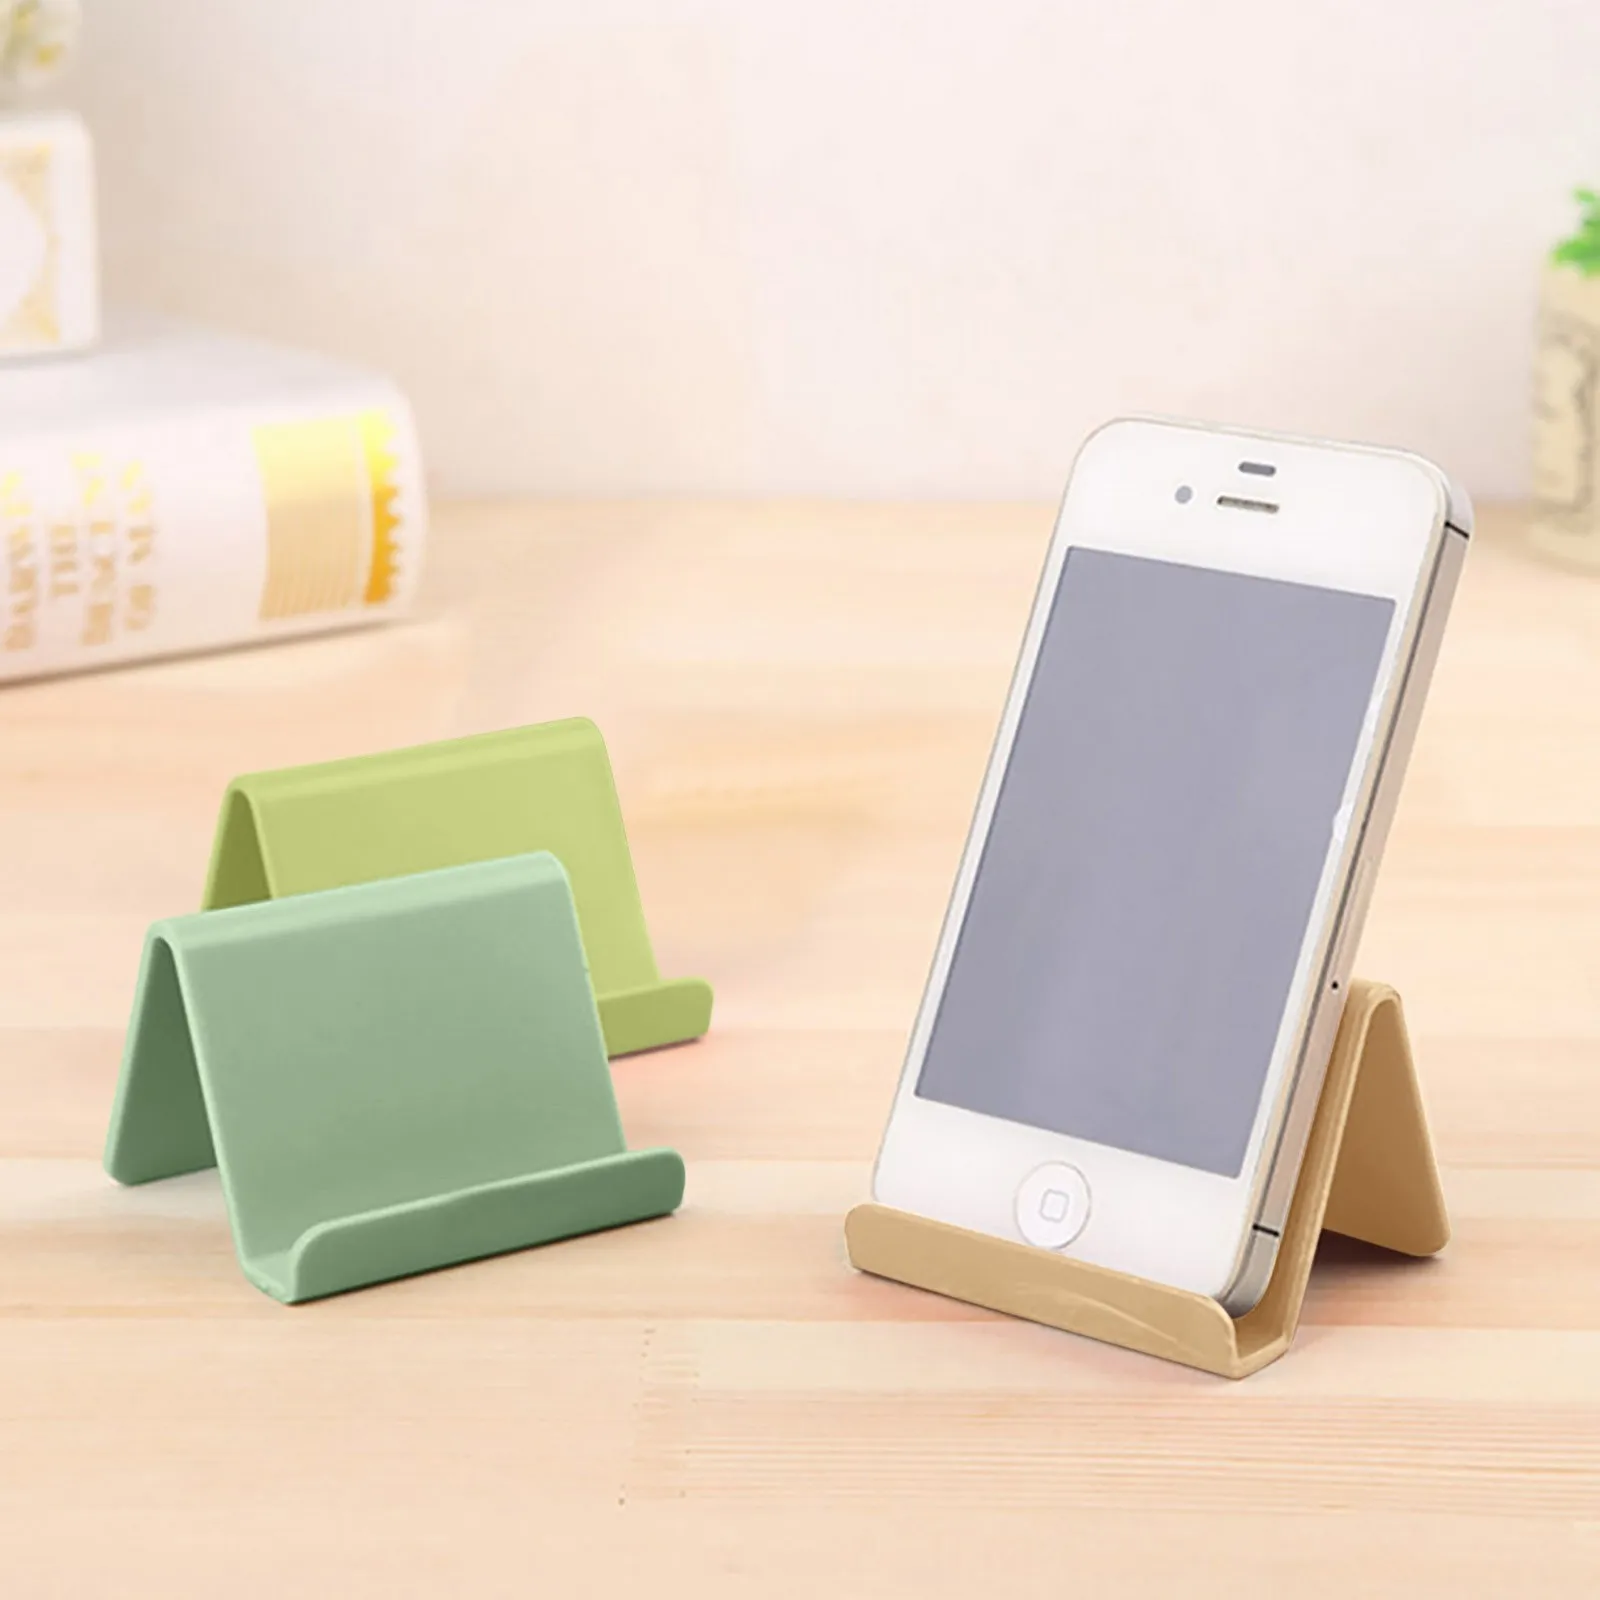 2021 Smartphone Holder Stand Candy Mini mobile phone accessories Desktop holders For IPhone xiaomi Portable Desk Stand Tablet phone stands